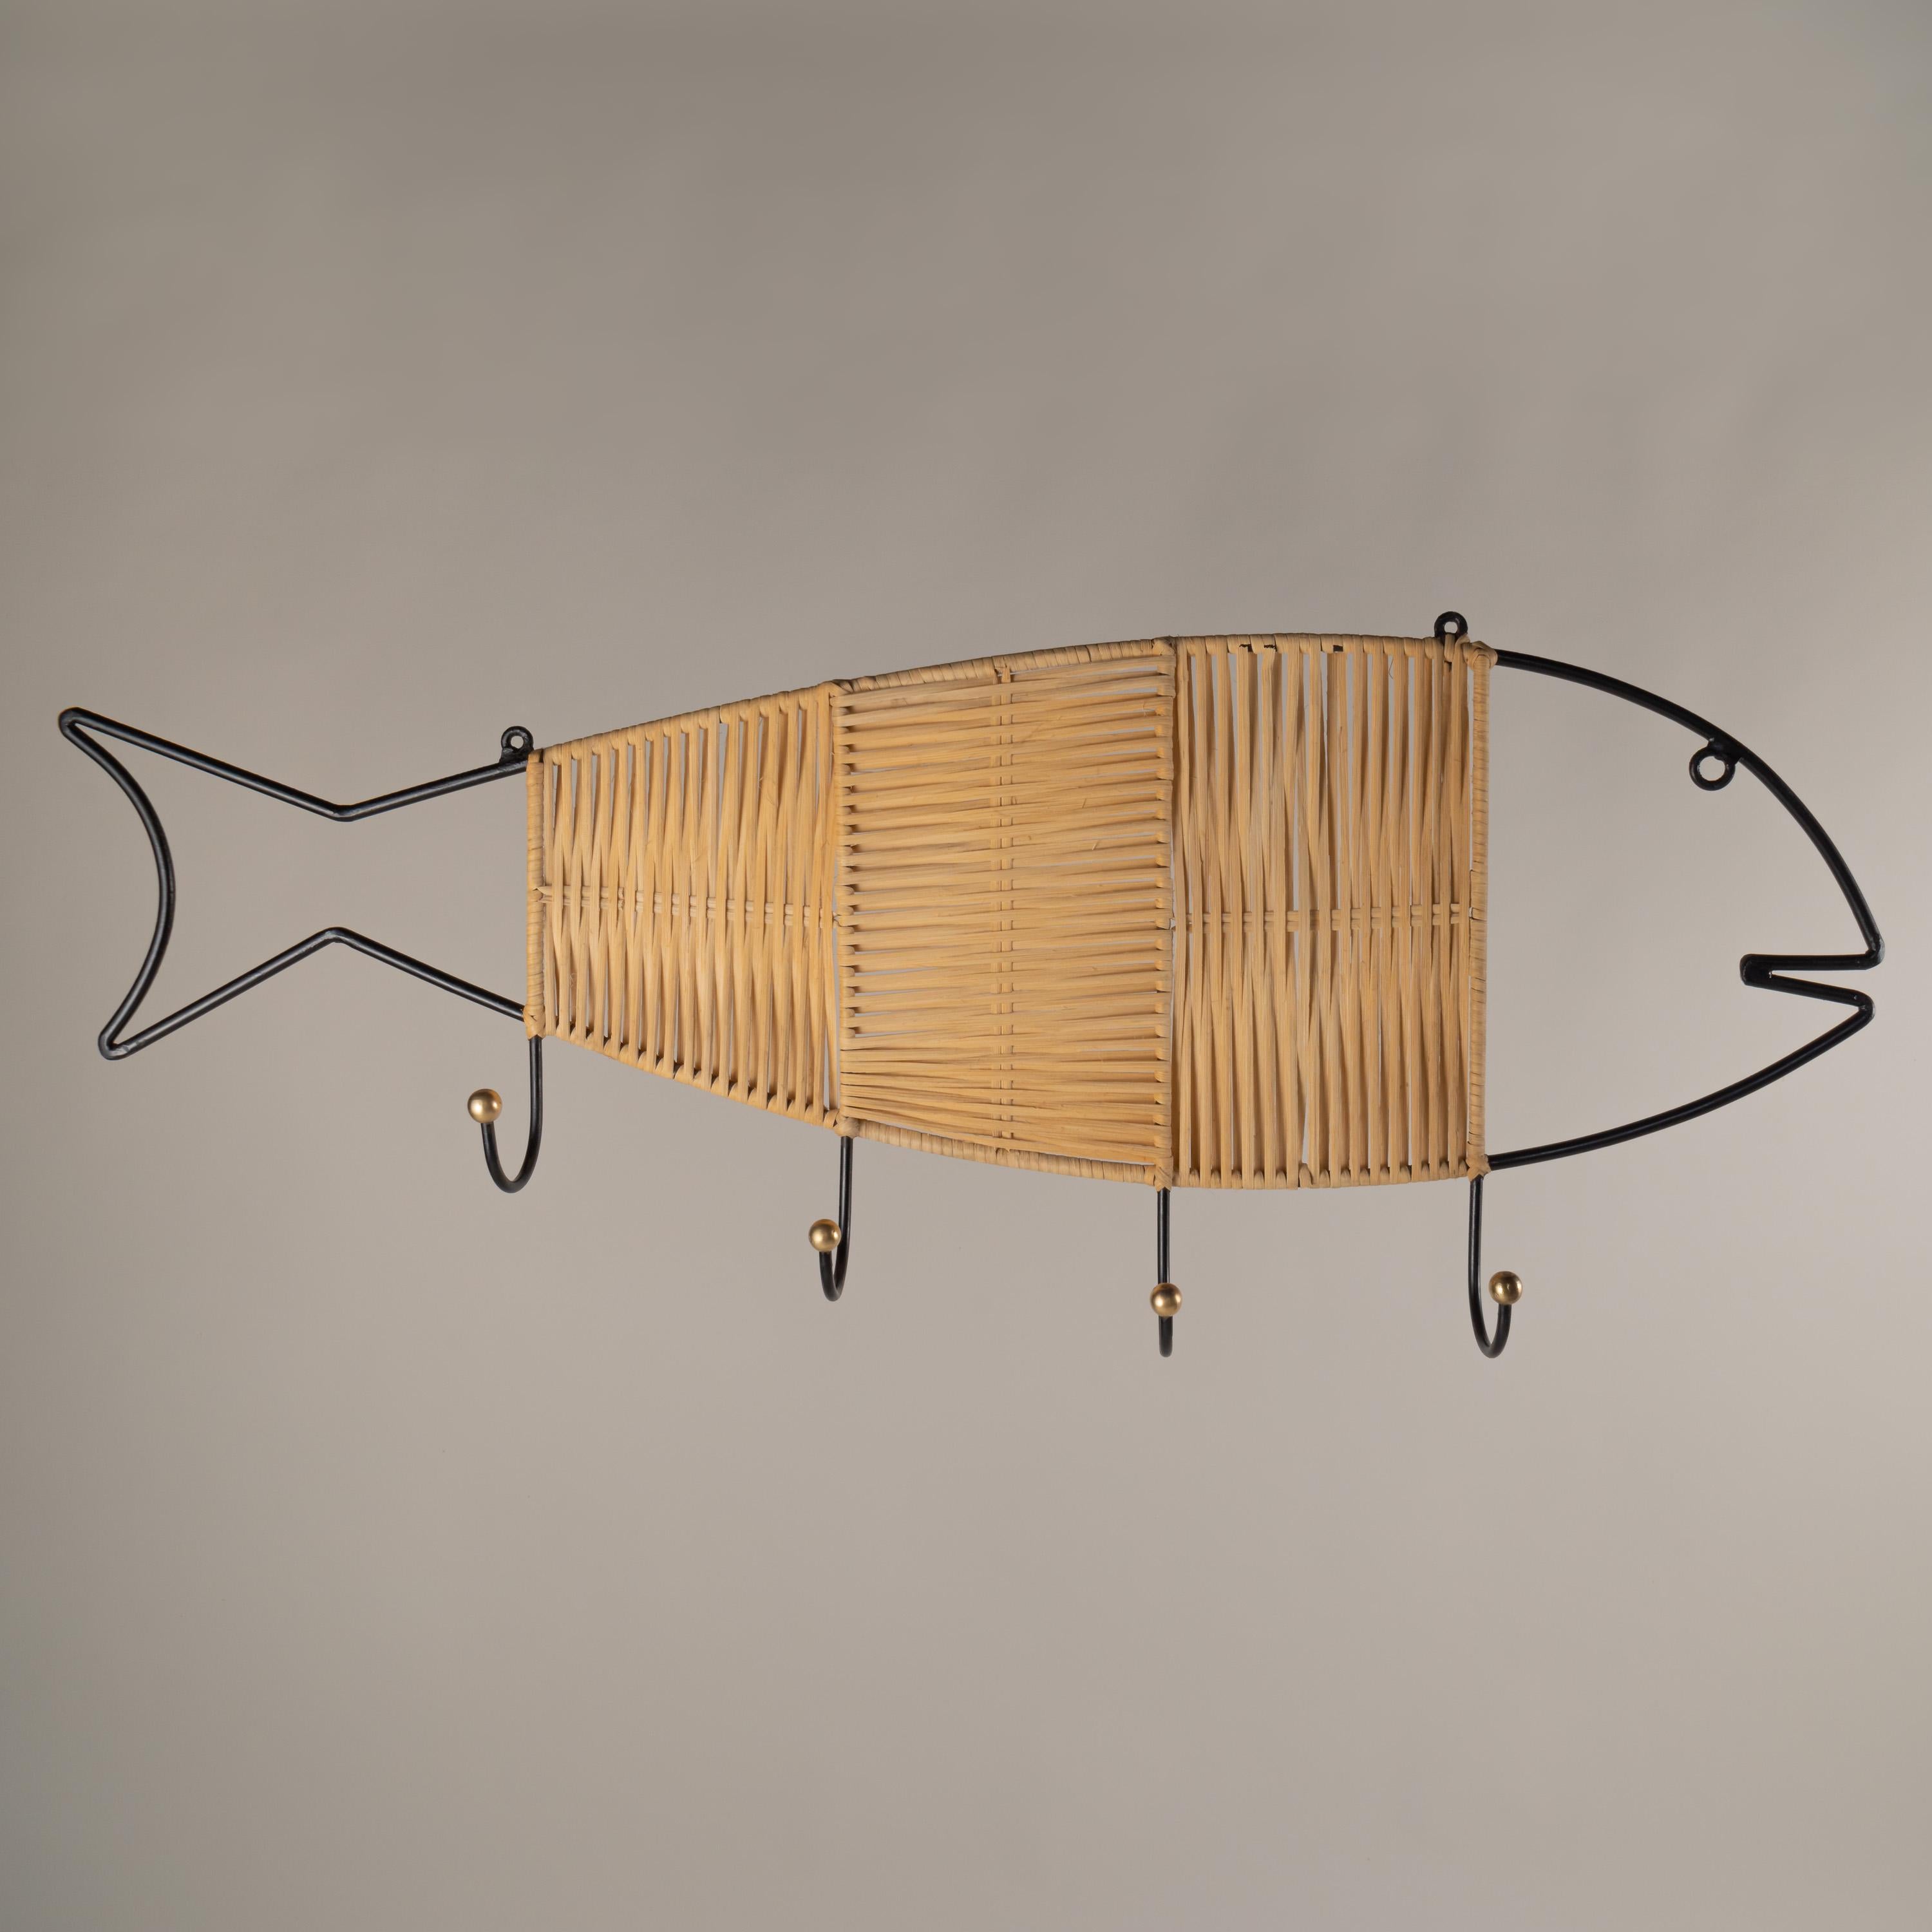 A very simple fish-shaped wall coat/hat hanger with four hooks from the 1950s. Handmade wrought iron painted in matte black made in Mexico, weaved wicker in different directions add a sense of texture to this floating whimsical fish. Each hook has a